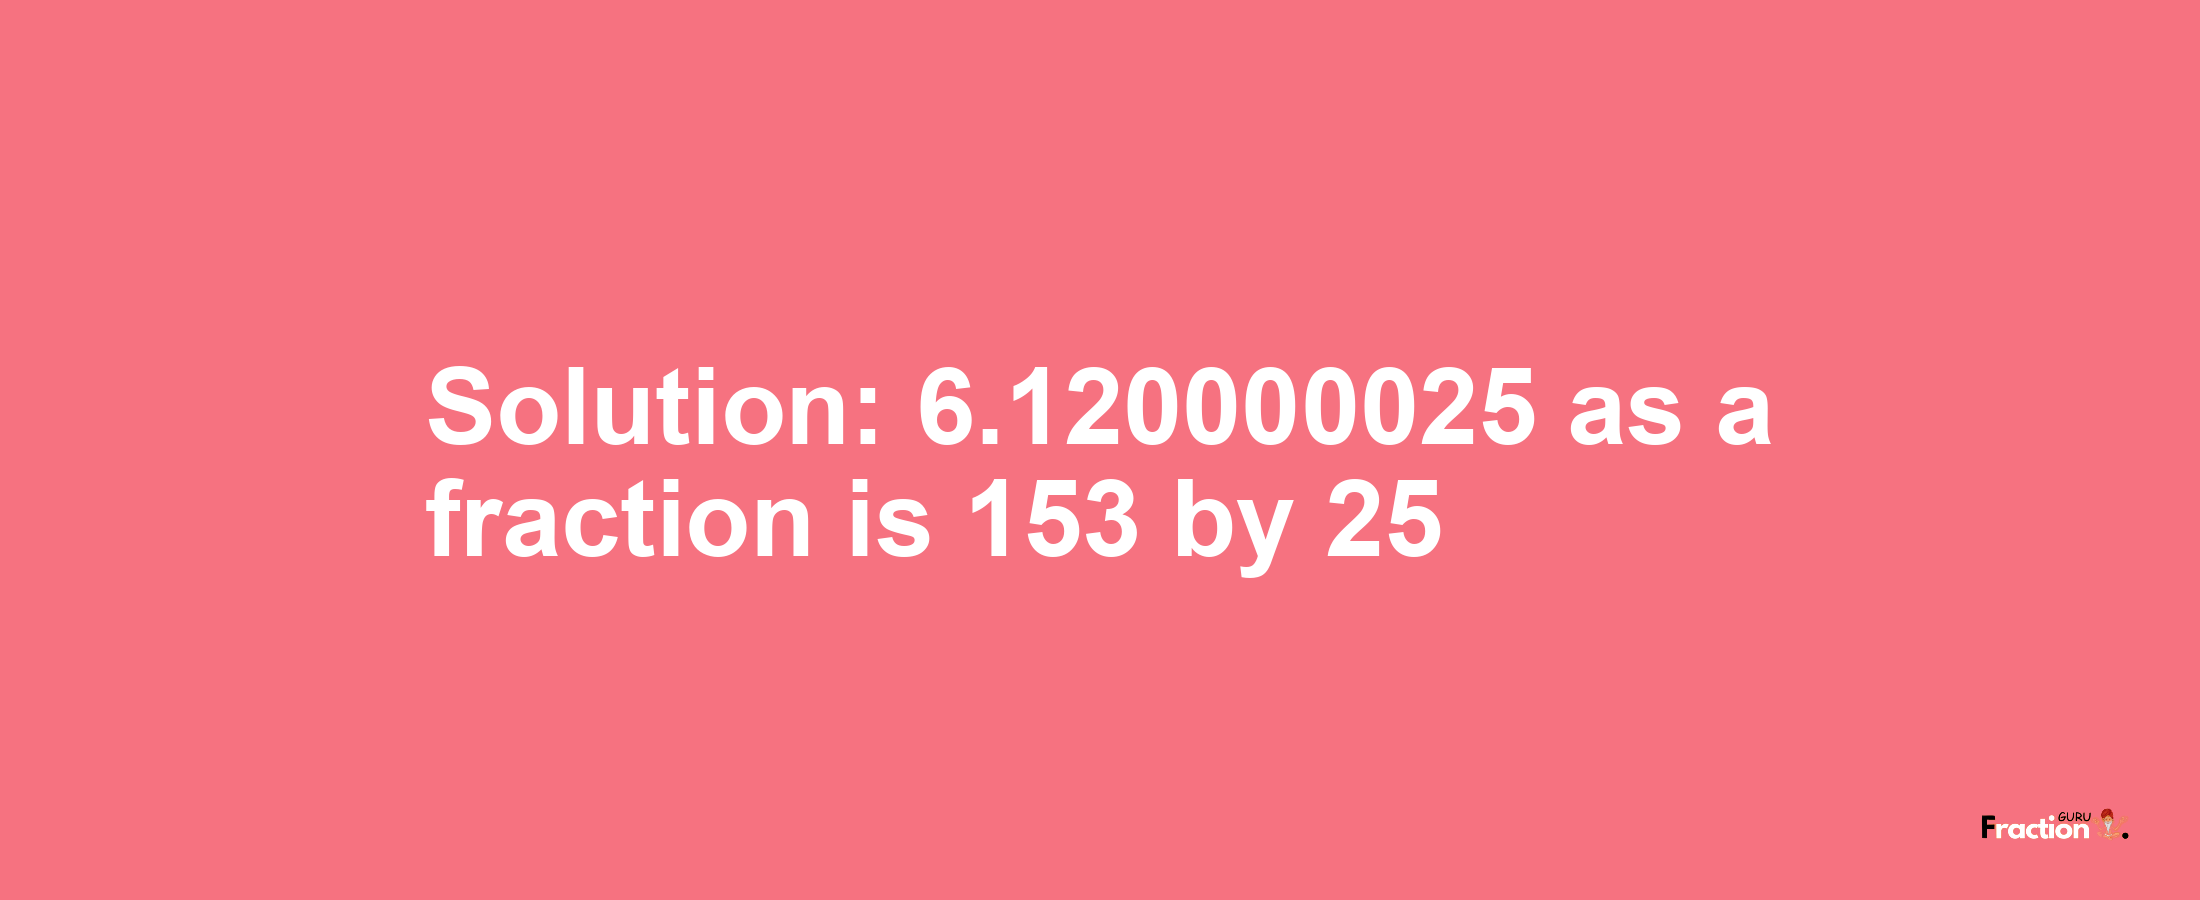 Solution:6.120000025 as a fraction is 153/25